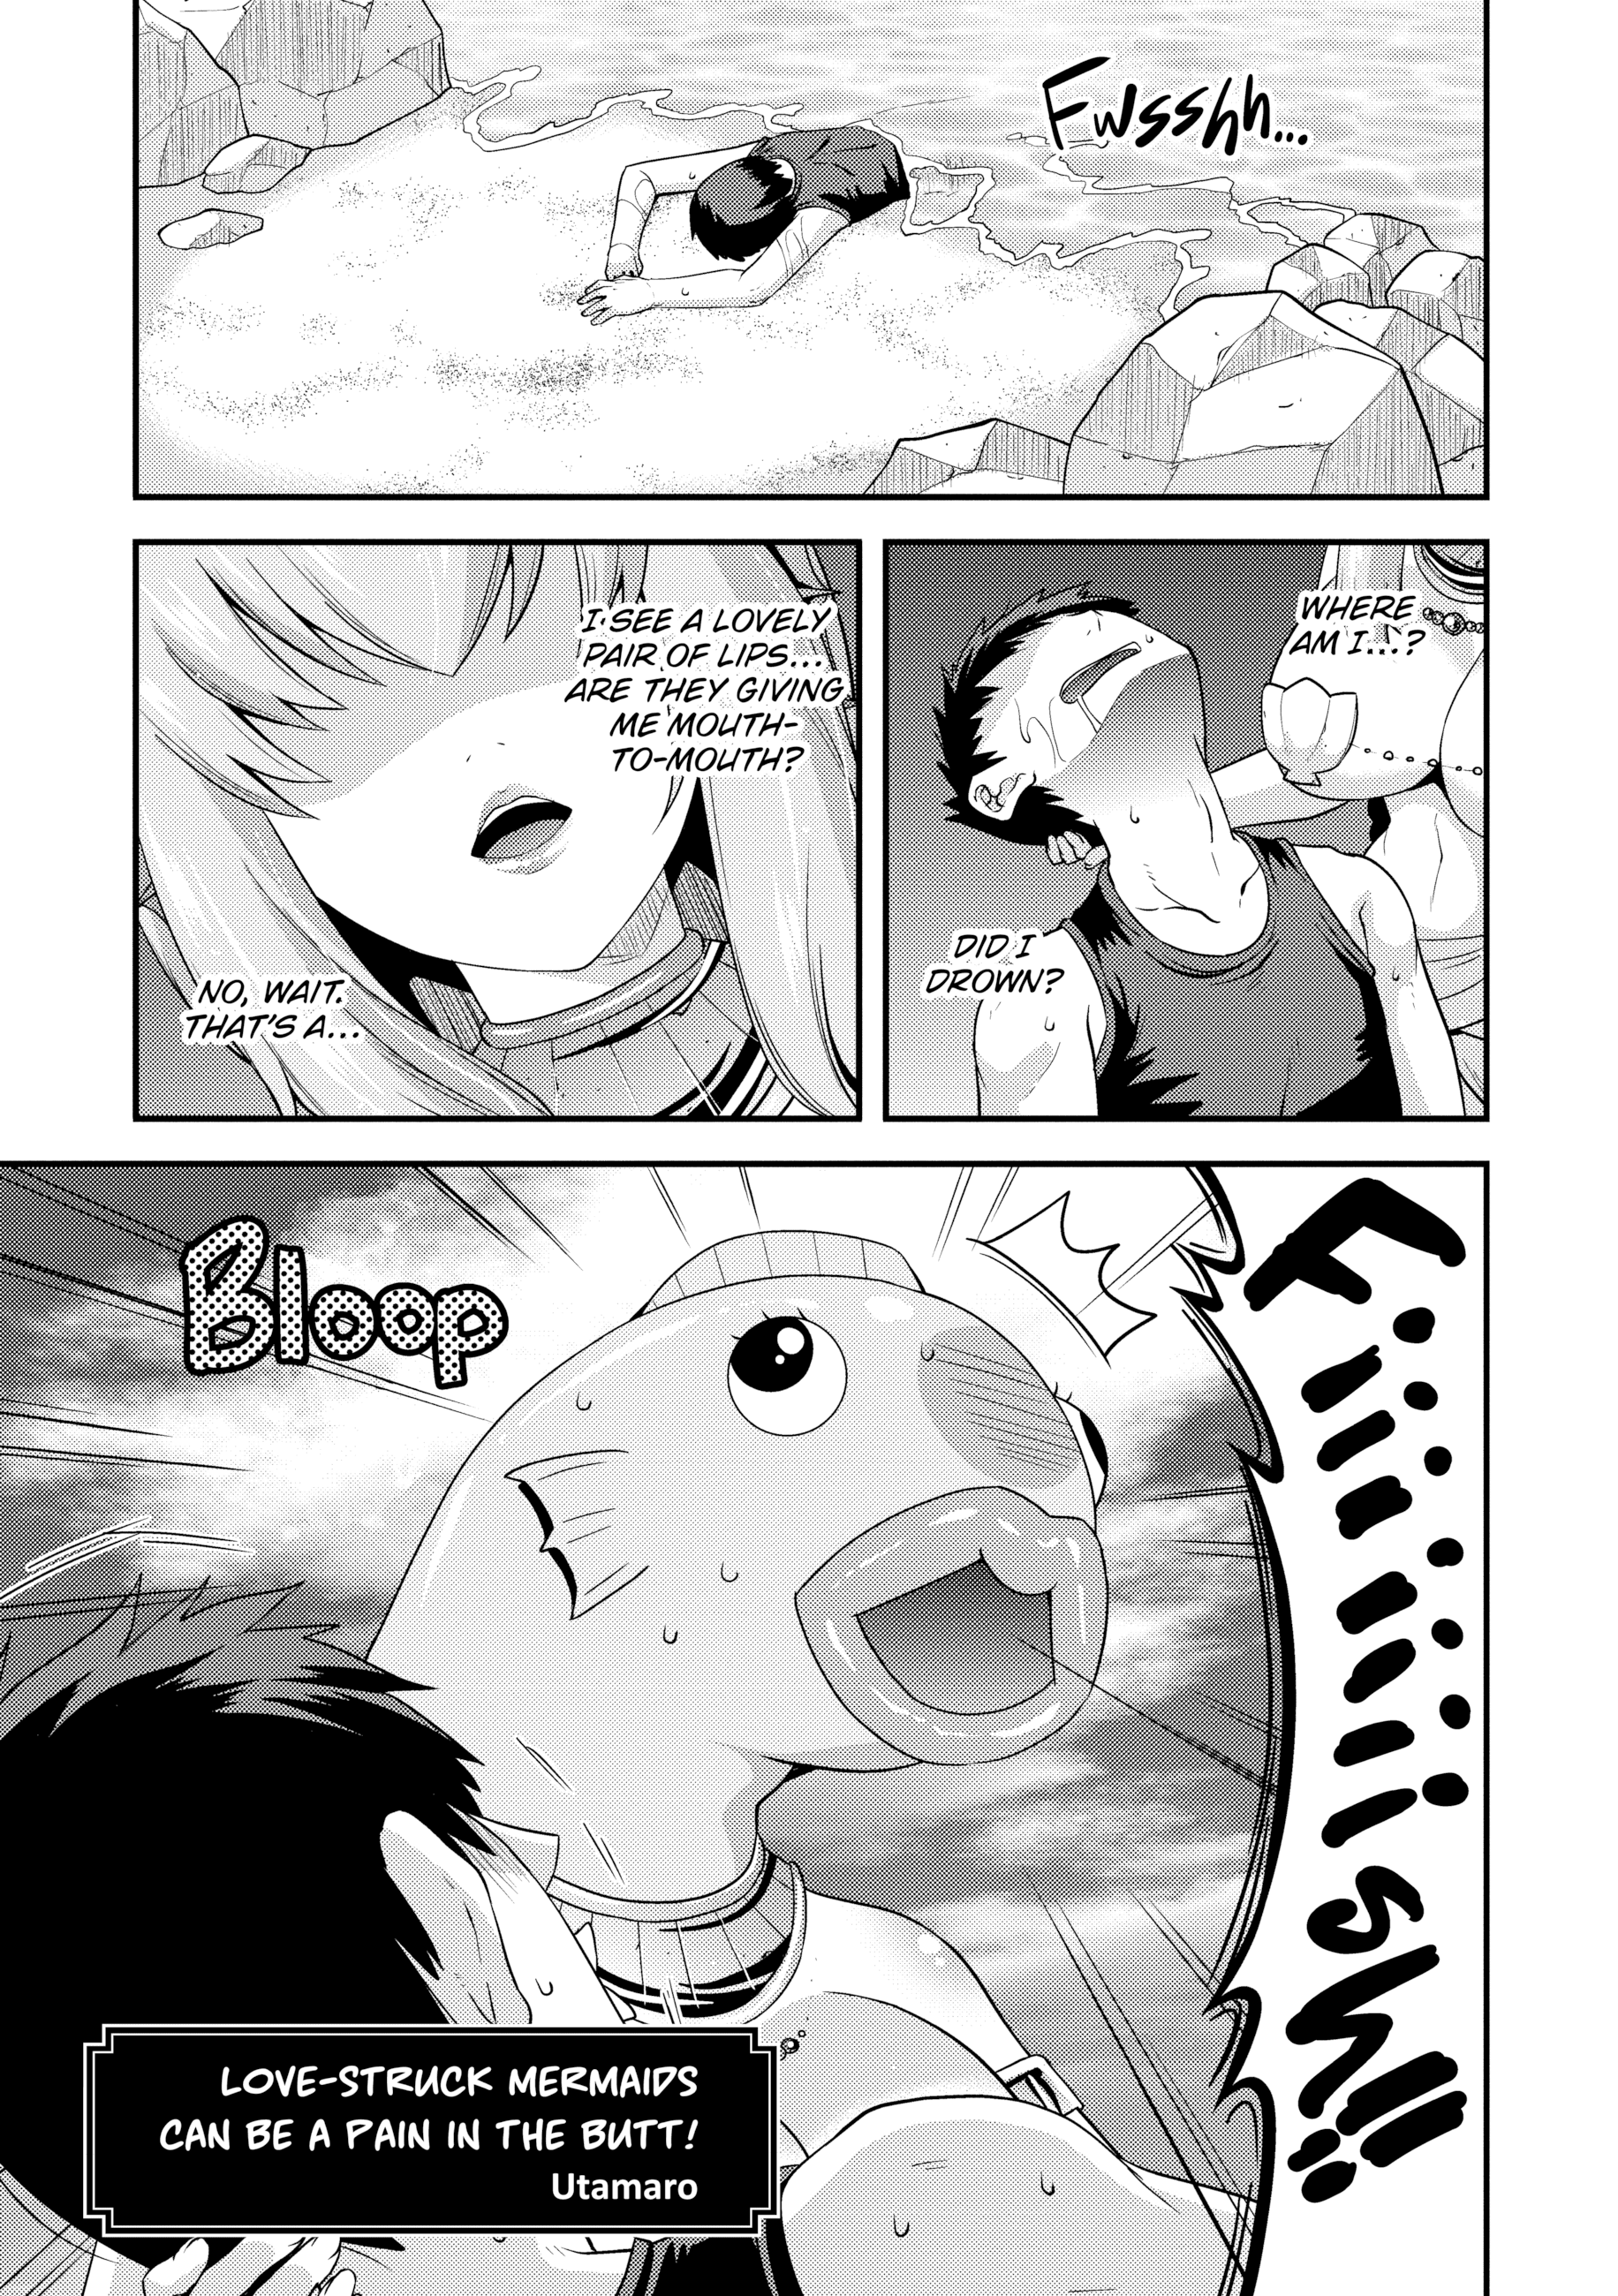 Love-Struck Mermaids Can be a Pain in the Butt! Hentai Image